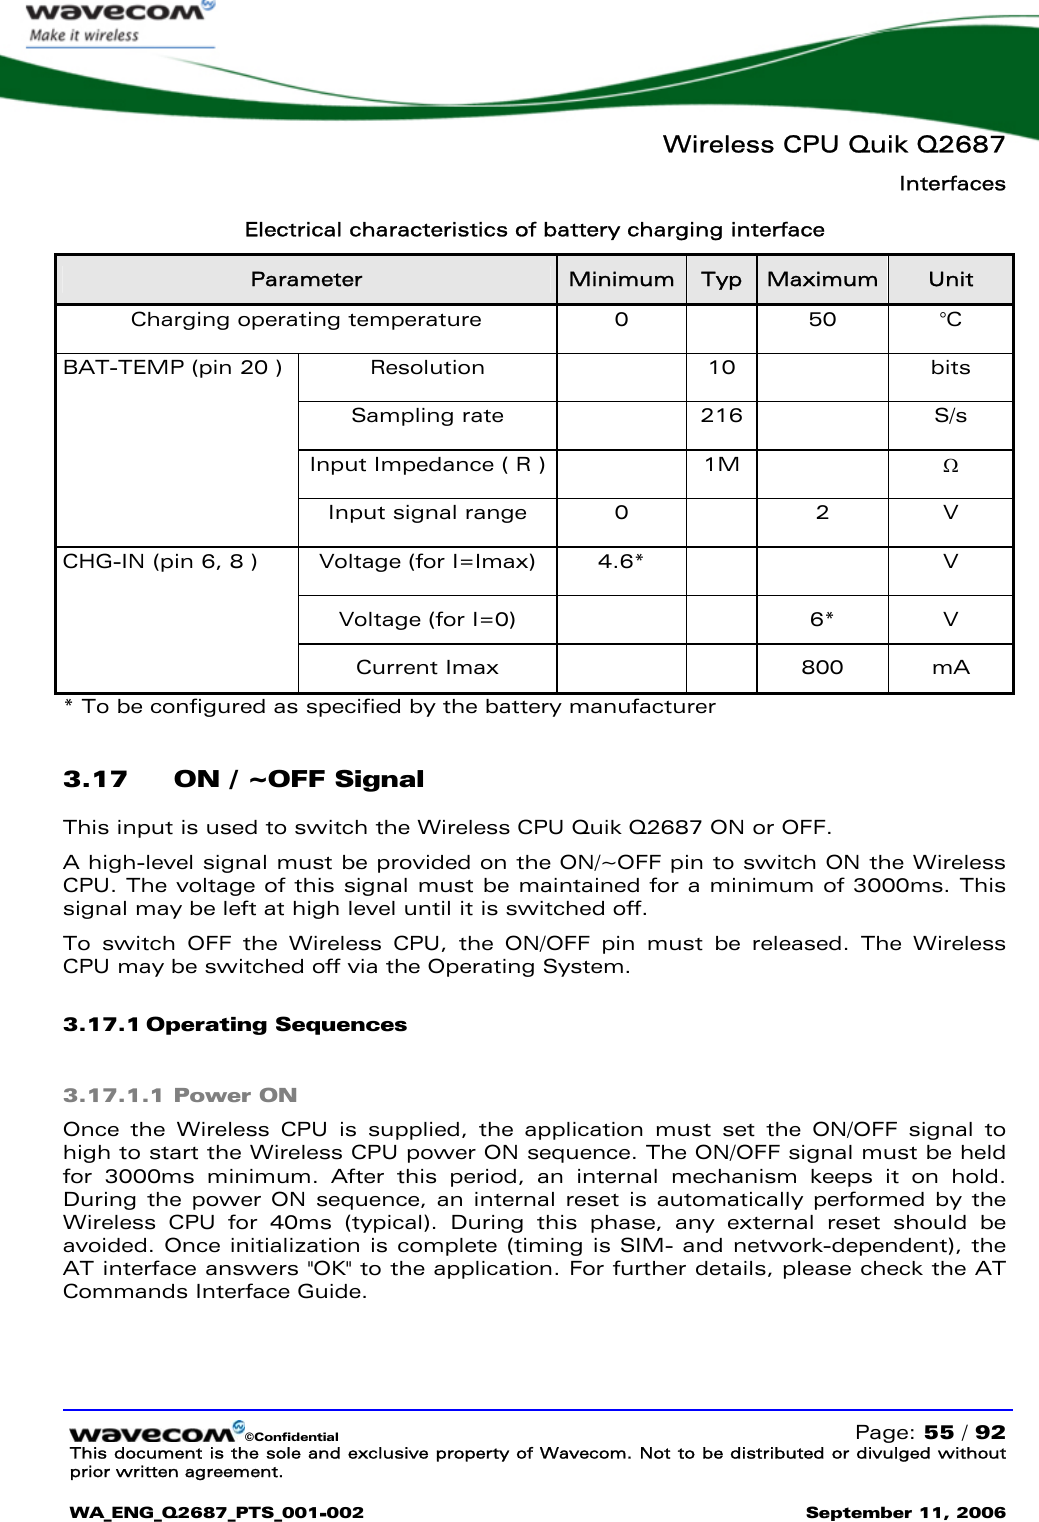   Wireless CPU Quik Q2687 Interfaces   ©Confidential   Page: 55 / 92 This document is the sole and exclusive property of Wavecom. Not to be distributed or divulged without prior written agreement.  WA_ENG_Q2687_PTS_001-002 September 11, 2006   Electrical characteristics of battery charging interface Parameter  Minimum  Typ  Maximum  Unit Charging operating temperature  0    50  °C Resolution  10  bits Sampling rate    216    S/s Input Impedance ( R )    1M    Ω BAT-TEMP (pin 20 ) Input signal range  0    2  V Voltage (for I=Imax)  4.6*      V Voltage (for I=0)      6*  V CHG-IN (pin 6, 8 ) Current Imax      800  mA * To be configured as specified by the battery manufacturer 3.17 ON / ~OFF Signal This input is used to switch the Wireless CPU Quik Q2687 ON or OFF.  A high-level signal must be provided on the ON/~OFF pin to switch ON the Wireless CPU. The voltage of this signal must be maintained for a minimum of 3000ms. This signal may be left at high level until it is switched off. To switch OFF the Wireless CPU, the ON/OFF pin must be released. The Wireless CPU may be switched off via the Operating System. 3.17.1 Operating Sequences 3.17.1.1 Power ON Once the Wireless CPU is supplied, the application must set the ON/OFF signal to high to start the Wireless CPU power ON sequence. The ON/OFF signal must be held for 3000ms minimum. After this period, an internal mechanism keeps it on hold. During the power ON sequence, an internal reset is automatically performed by the Wireless CPU for 40ms (typical). During this phase, any external reset should be avoided. Once initialization is complete (timing is SIM- and network-dependent), the AT interface answers &quot;OK&quot; to the application. For further details, please check the AT Commands Interface Guide. 